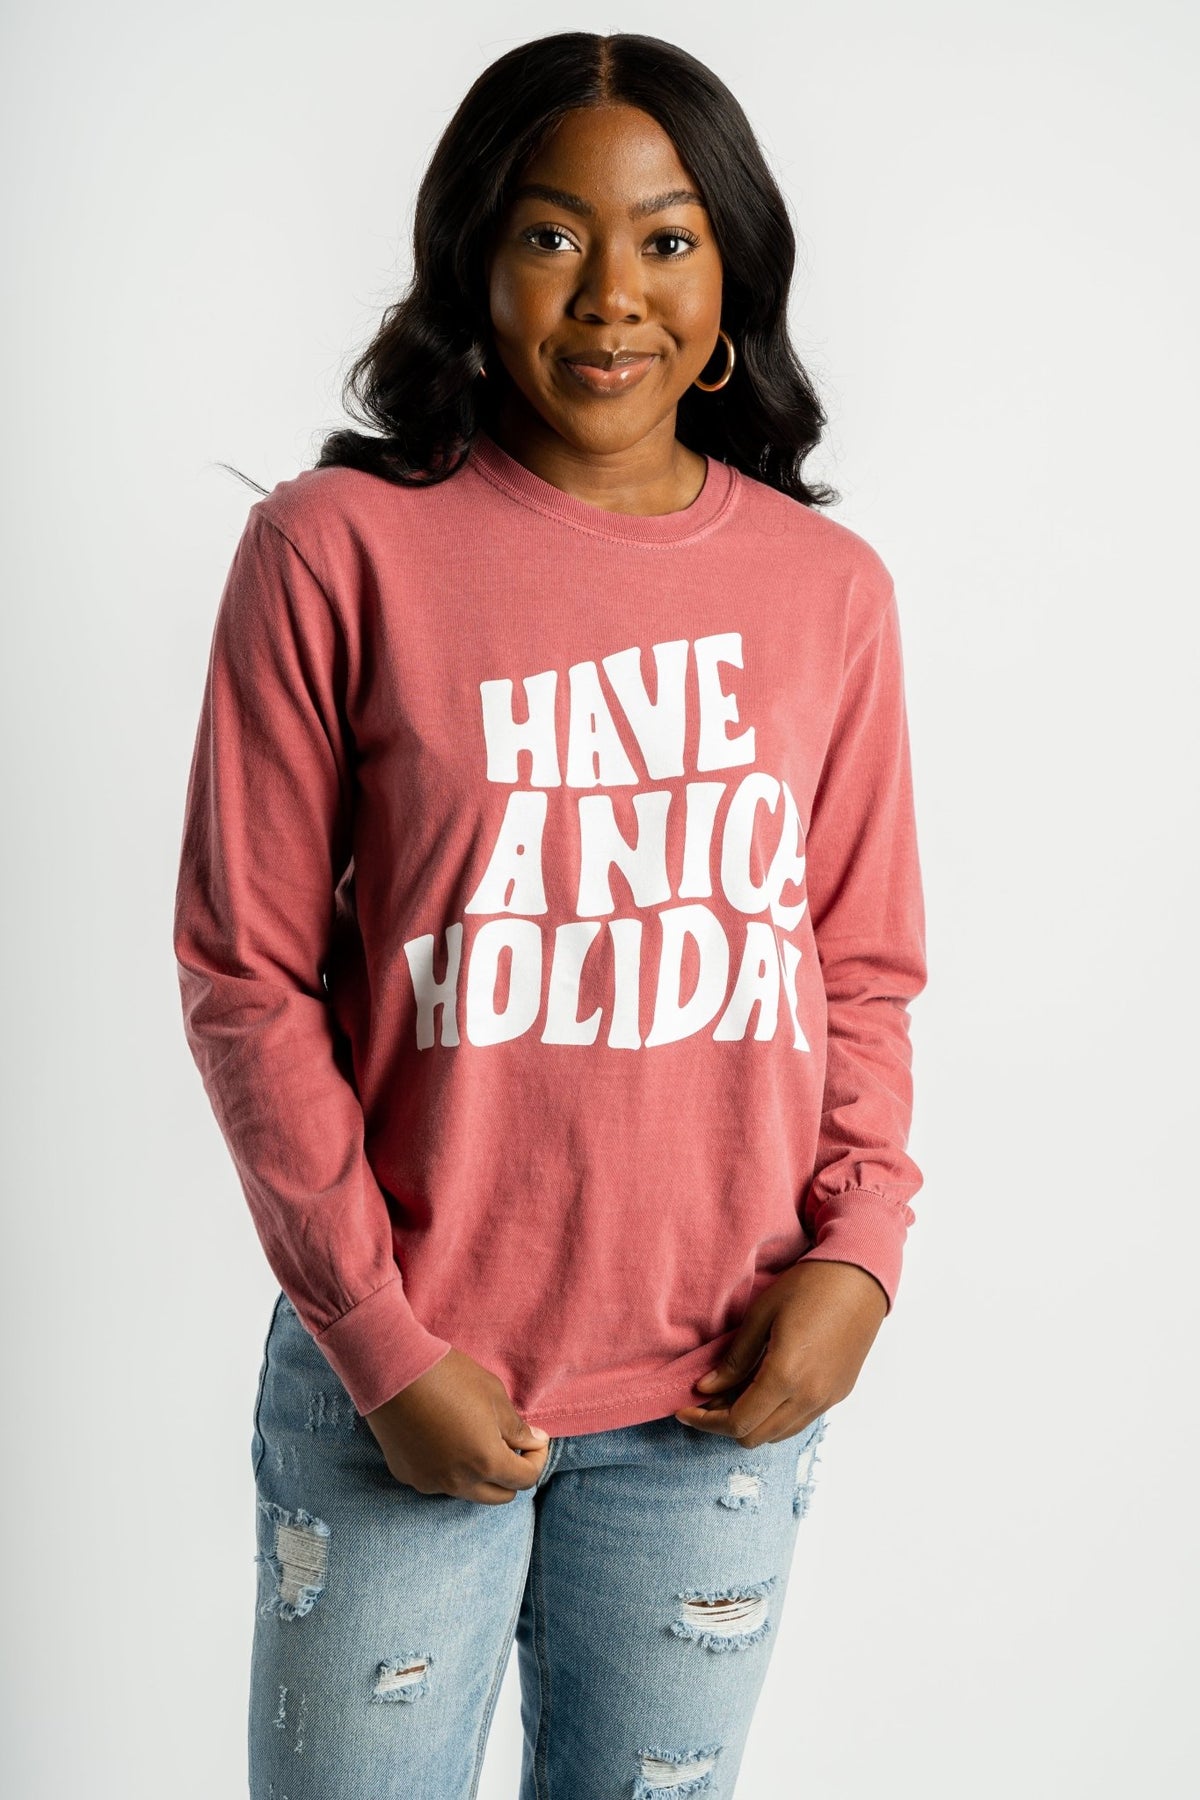 Have a nice holiday long sleeve comfort color t-shirt crimson - Stylish t-shirt - Trendy Graphic T-Shirts and Tank Tops at Lush Fashion Lounge Boutique in Oklahoma City